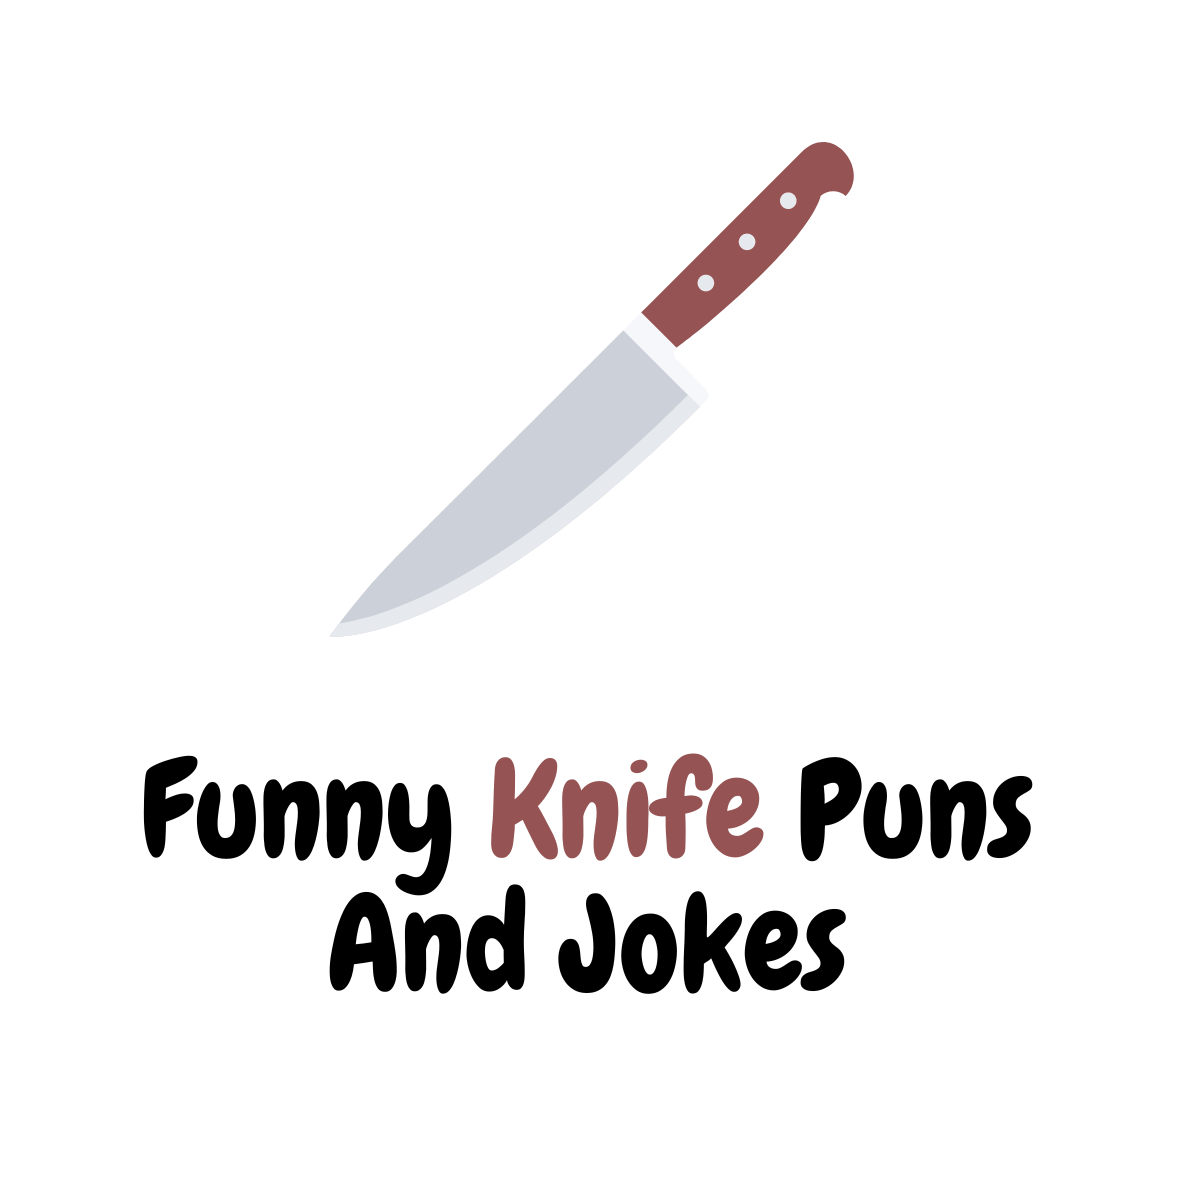 Funny Knife Puns And Jokes